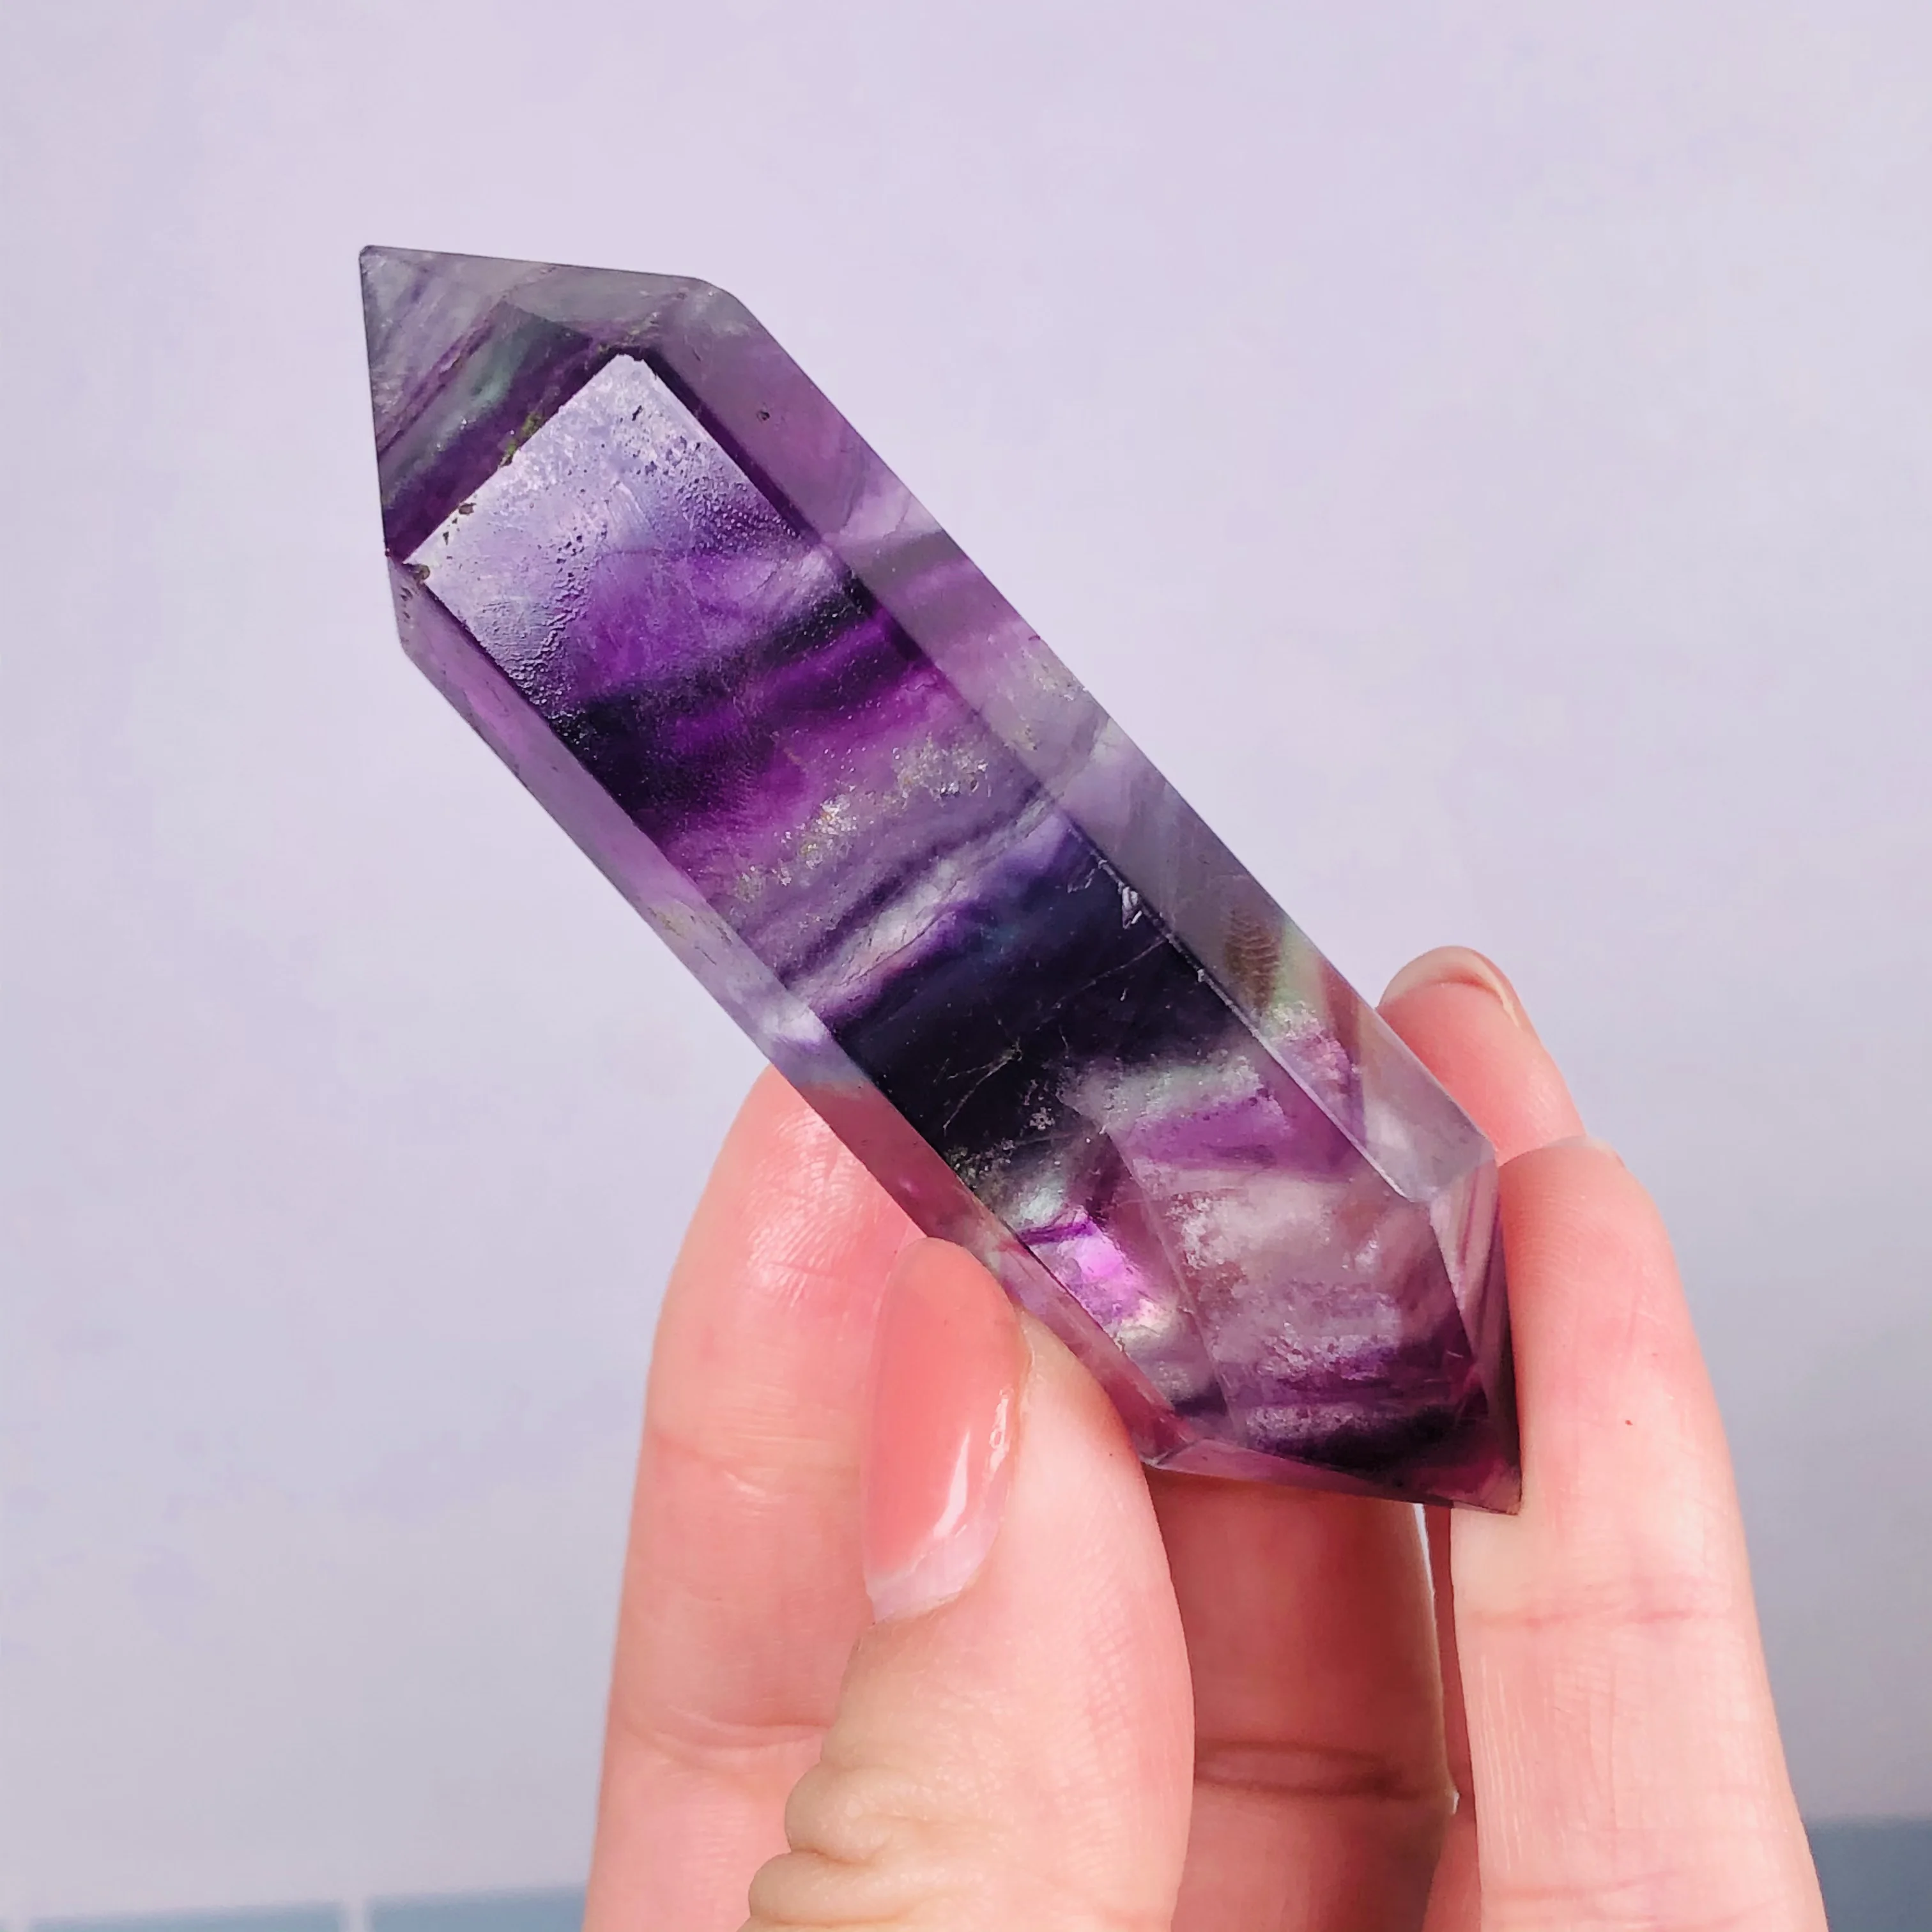 Details about   Colorful Natural Raw Fluorite Crystal Cluster Point Healing Stone Specimen Decor 